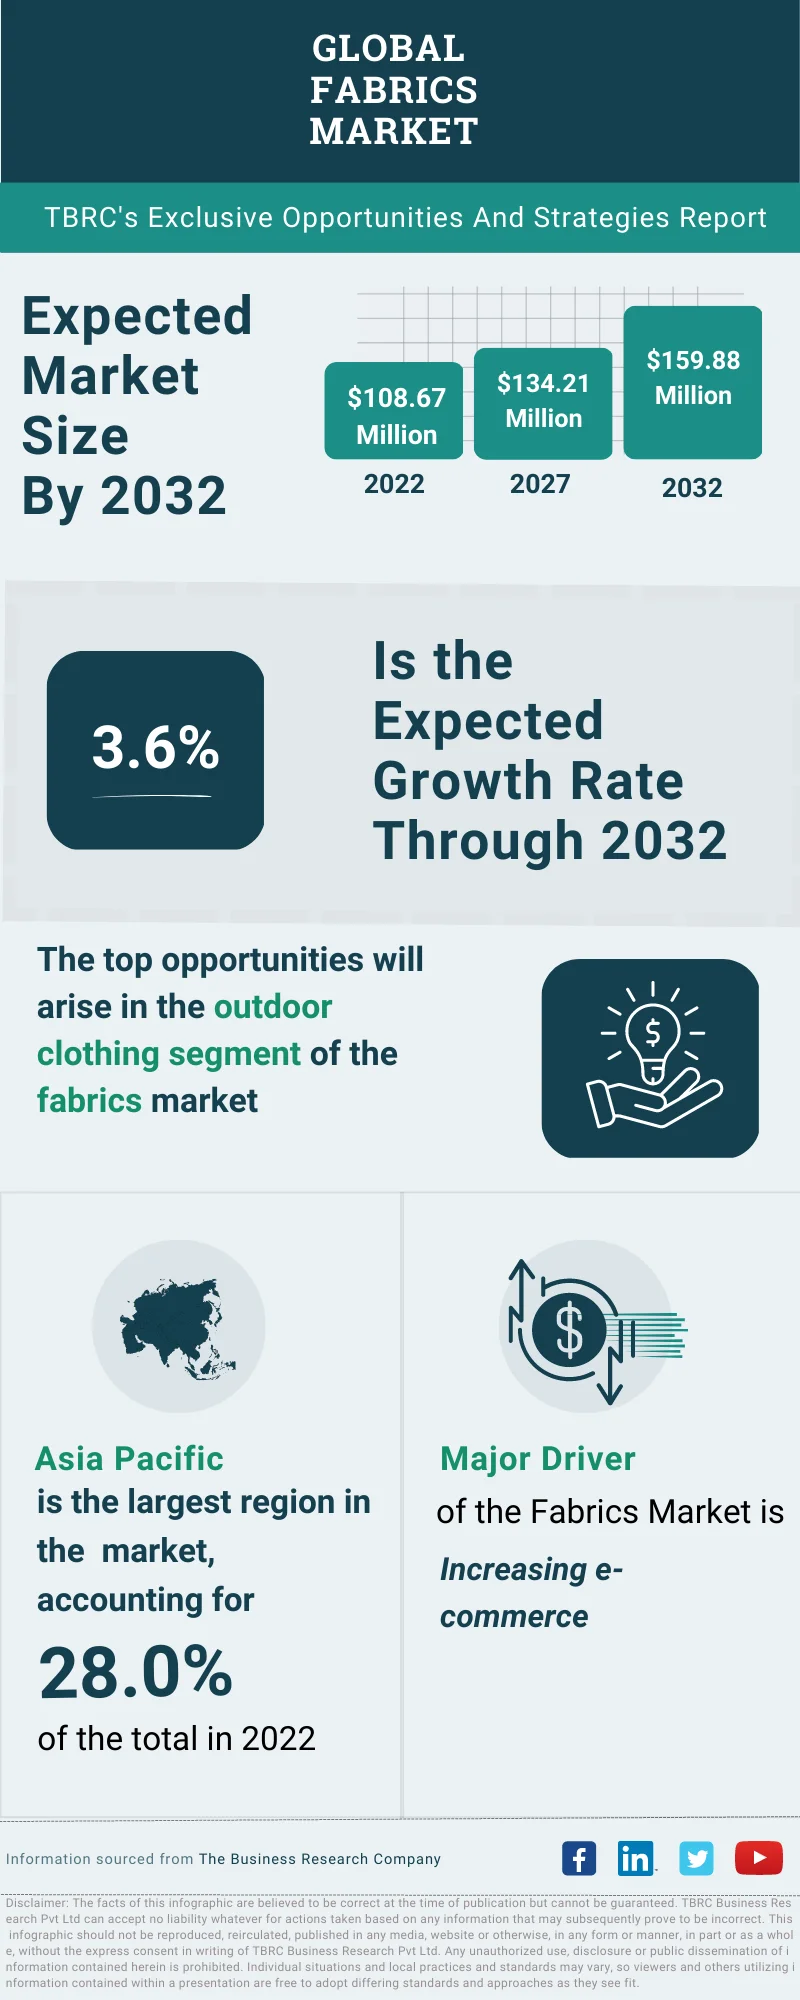 Fabrics Global Market Opportunities And Strategies To 2032